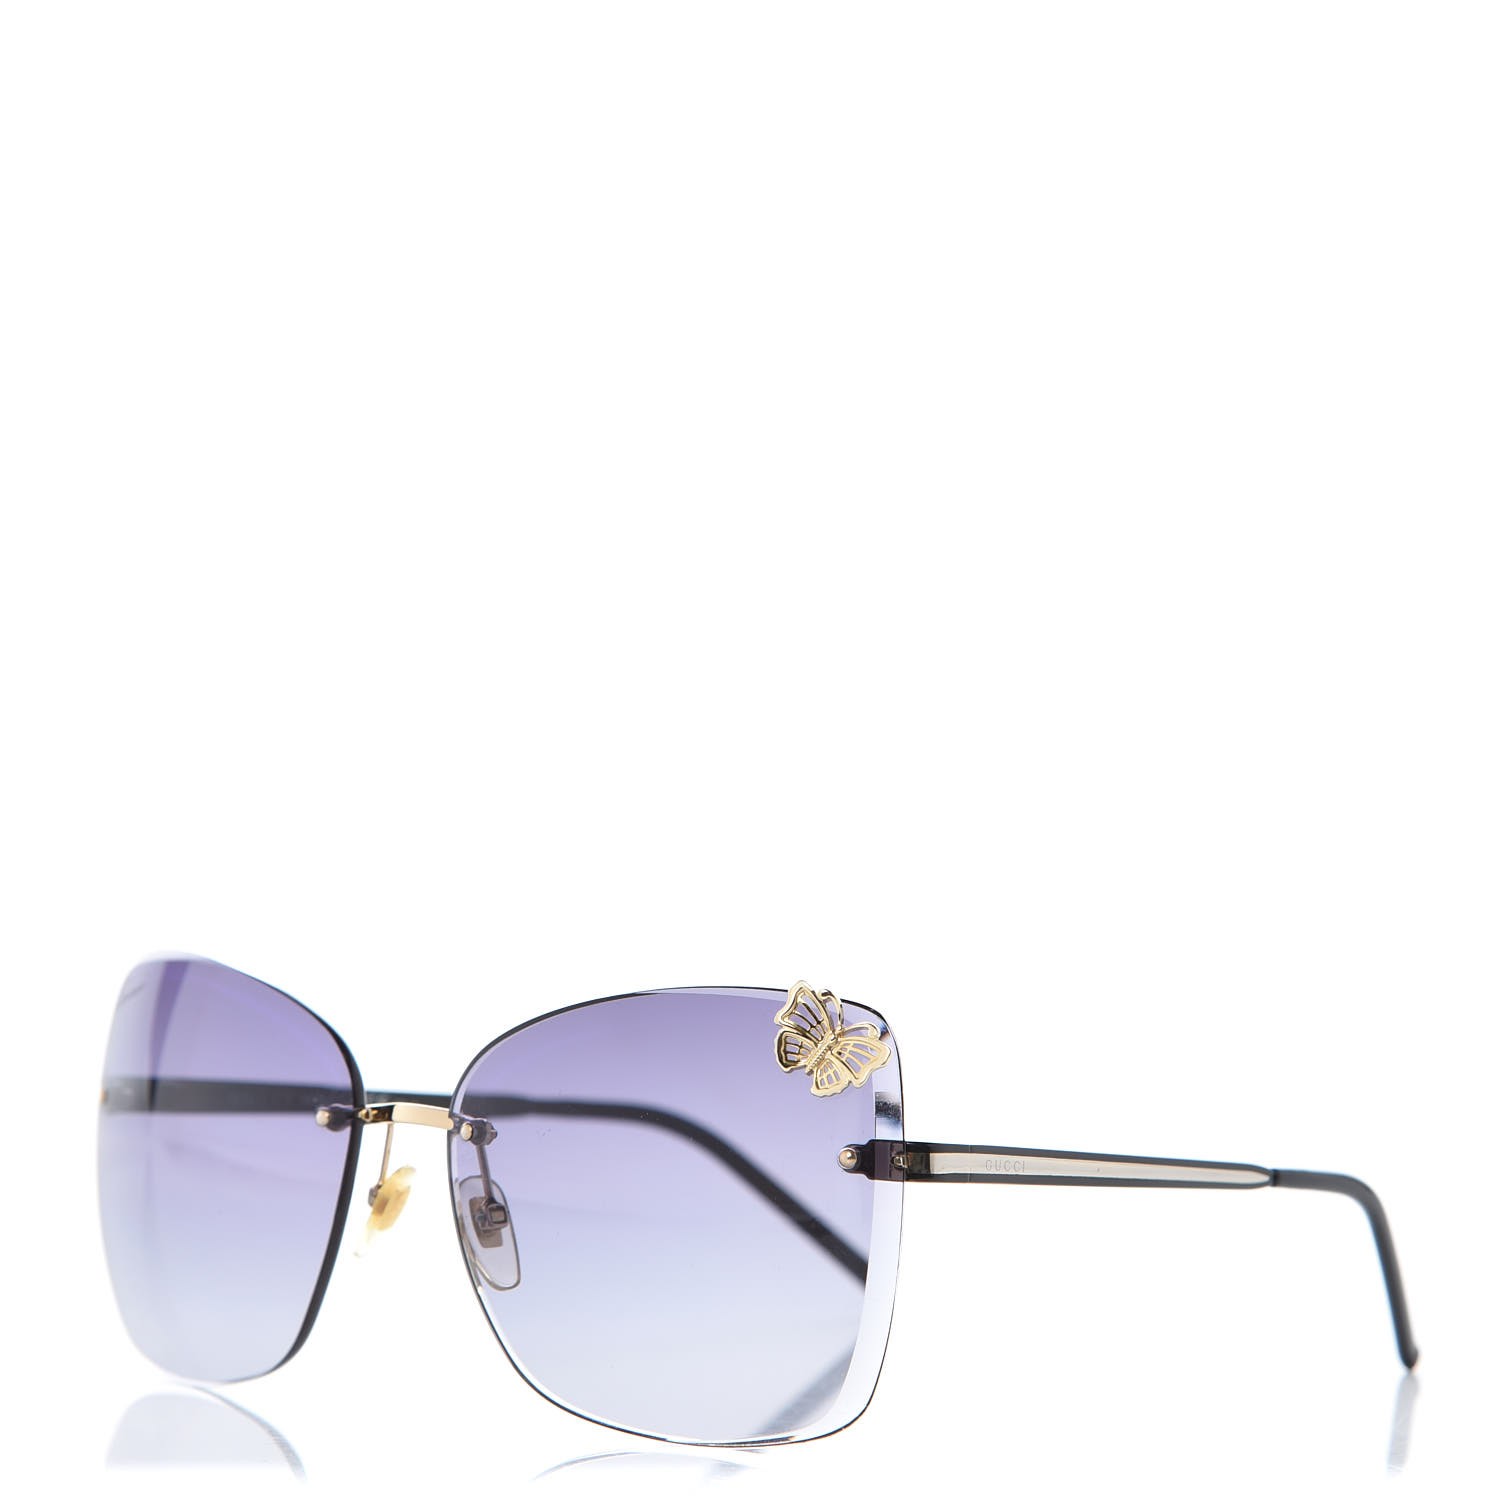 gucci butterfly glasses, OFF 73%,www 